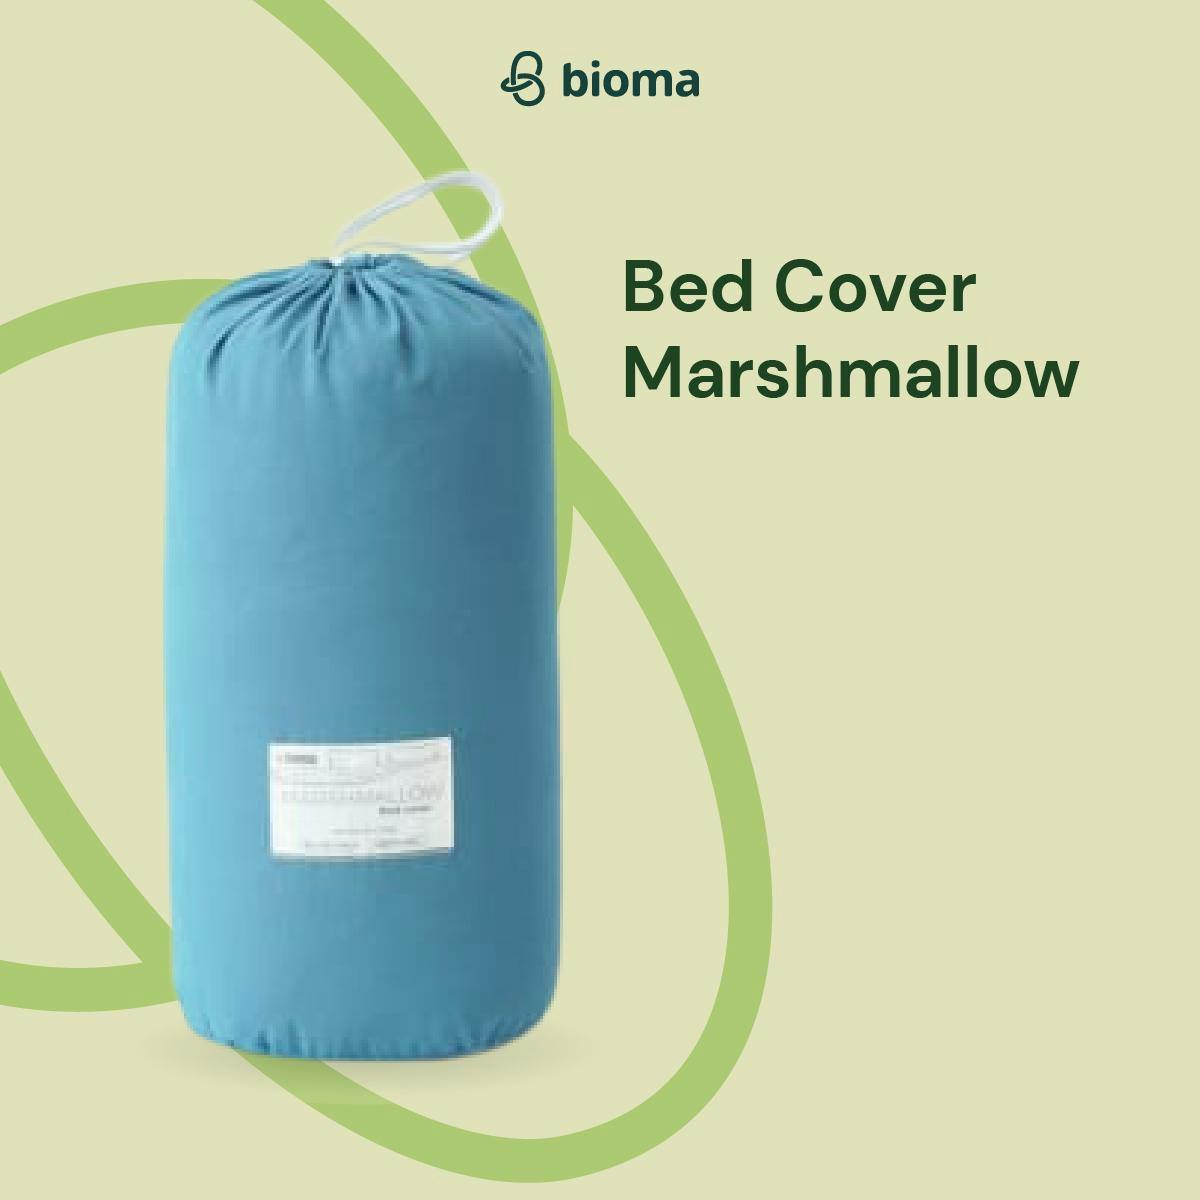 Image 481 Bed Cover Marshmallow